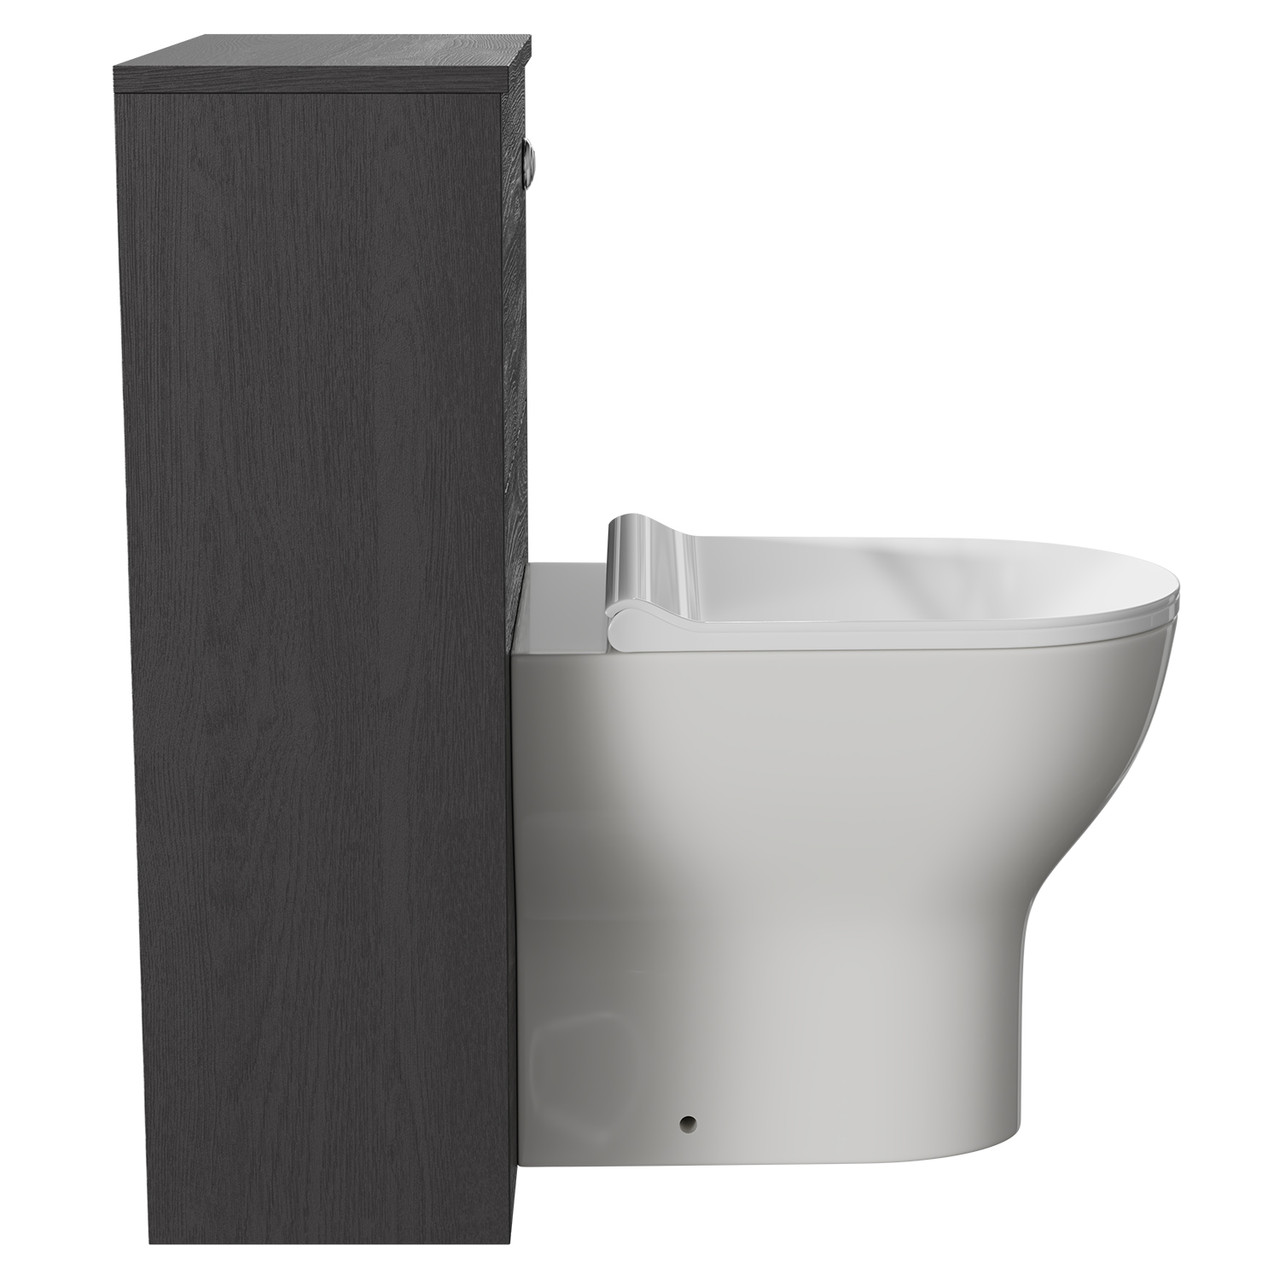 https://cdn11.bigcommerce.com/s-9p1s4pzh1p/images/stencil/1280x1280/products/19506/74244/horizon_graphite_grey_500mm_toilet_unit_and_jubilee_short_projection_rimless_back_to_wall_toilet_pan_with_soft_close_toilet_seat_side__83615.1695654541.jpg?c=1